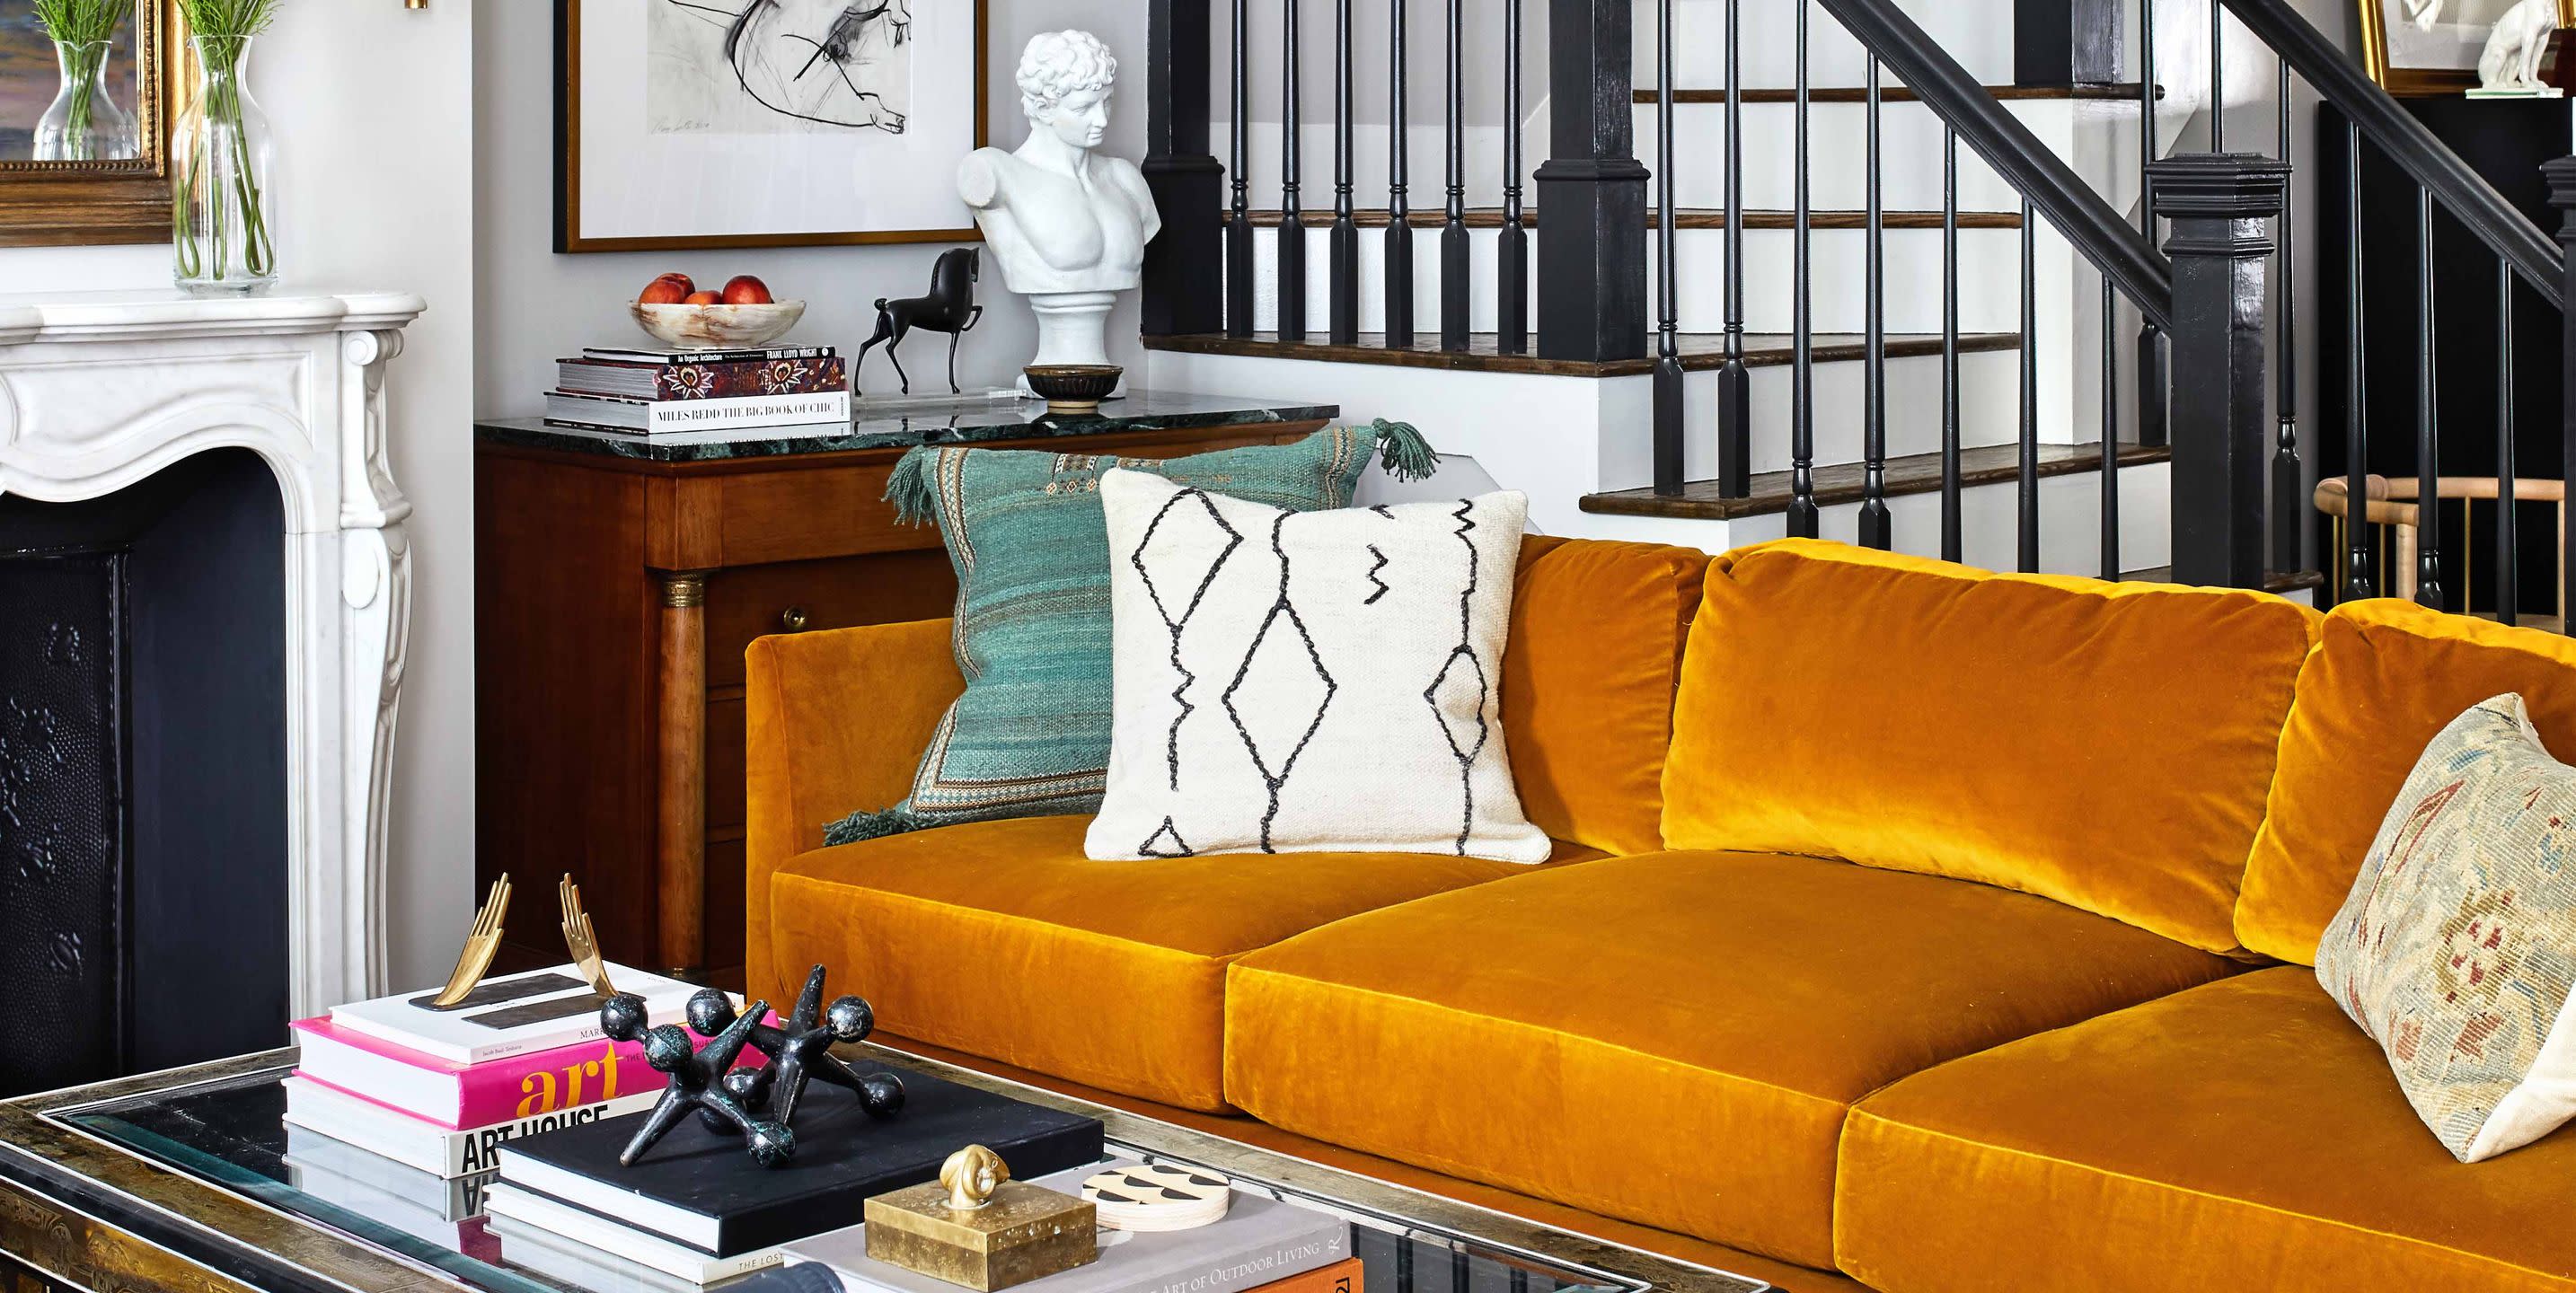 A Historic D C Home Is Enlivened With Vintage Furniture And